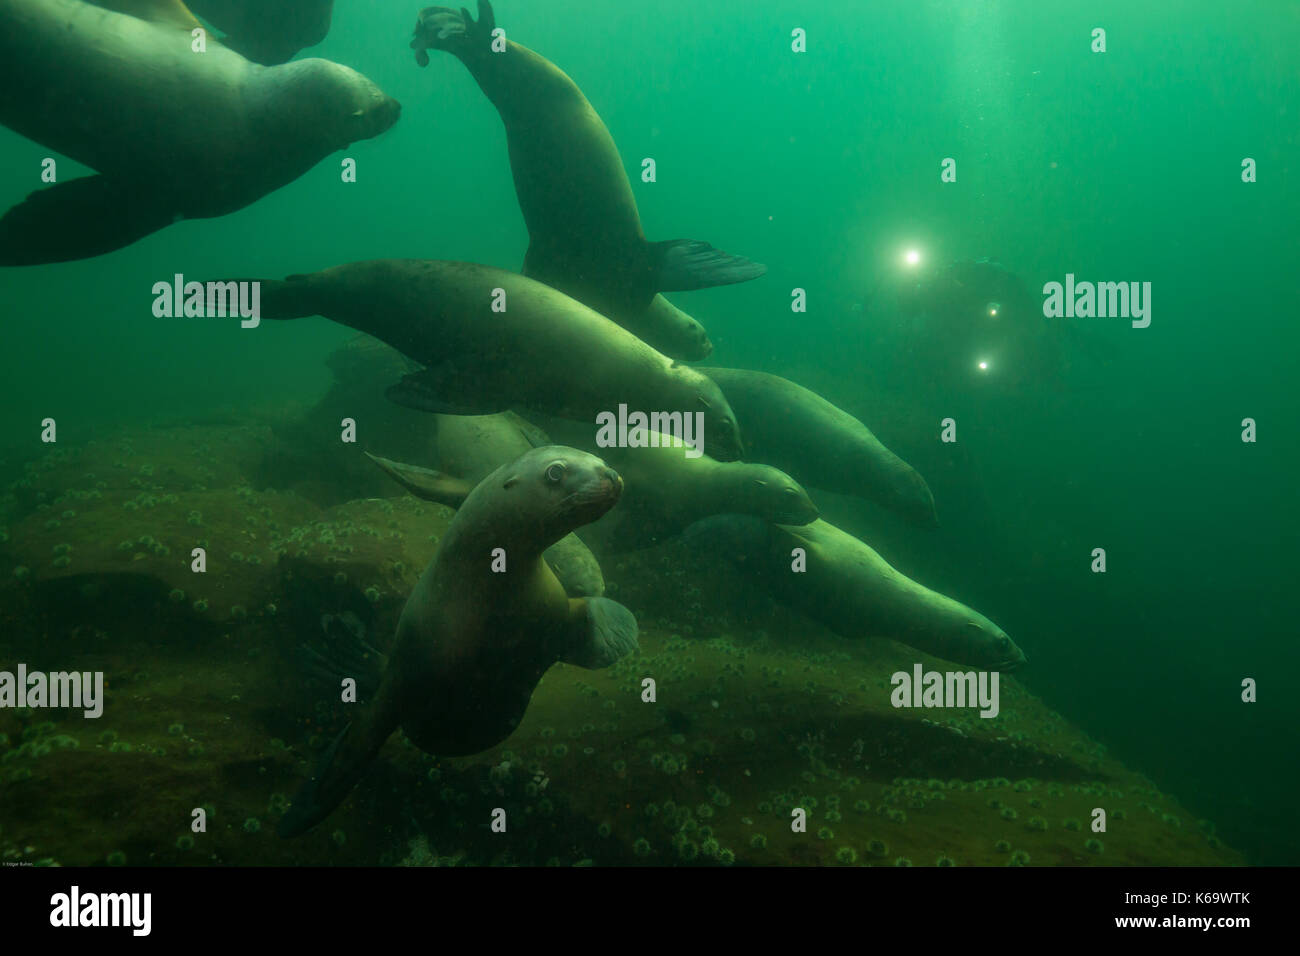 A herd of young sea lions swimming underwater in Pacific Ocean with a scuba diver in the background. Picture taken in Hornby Island, BC, Canada. Stock Photo